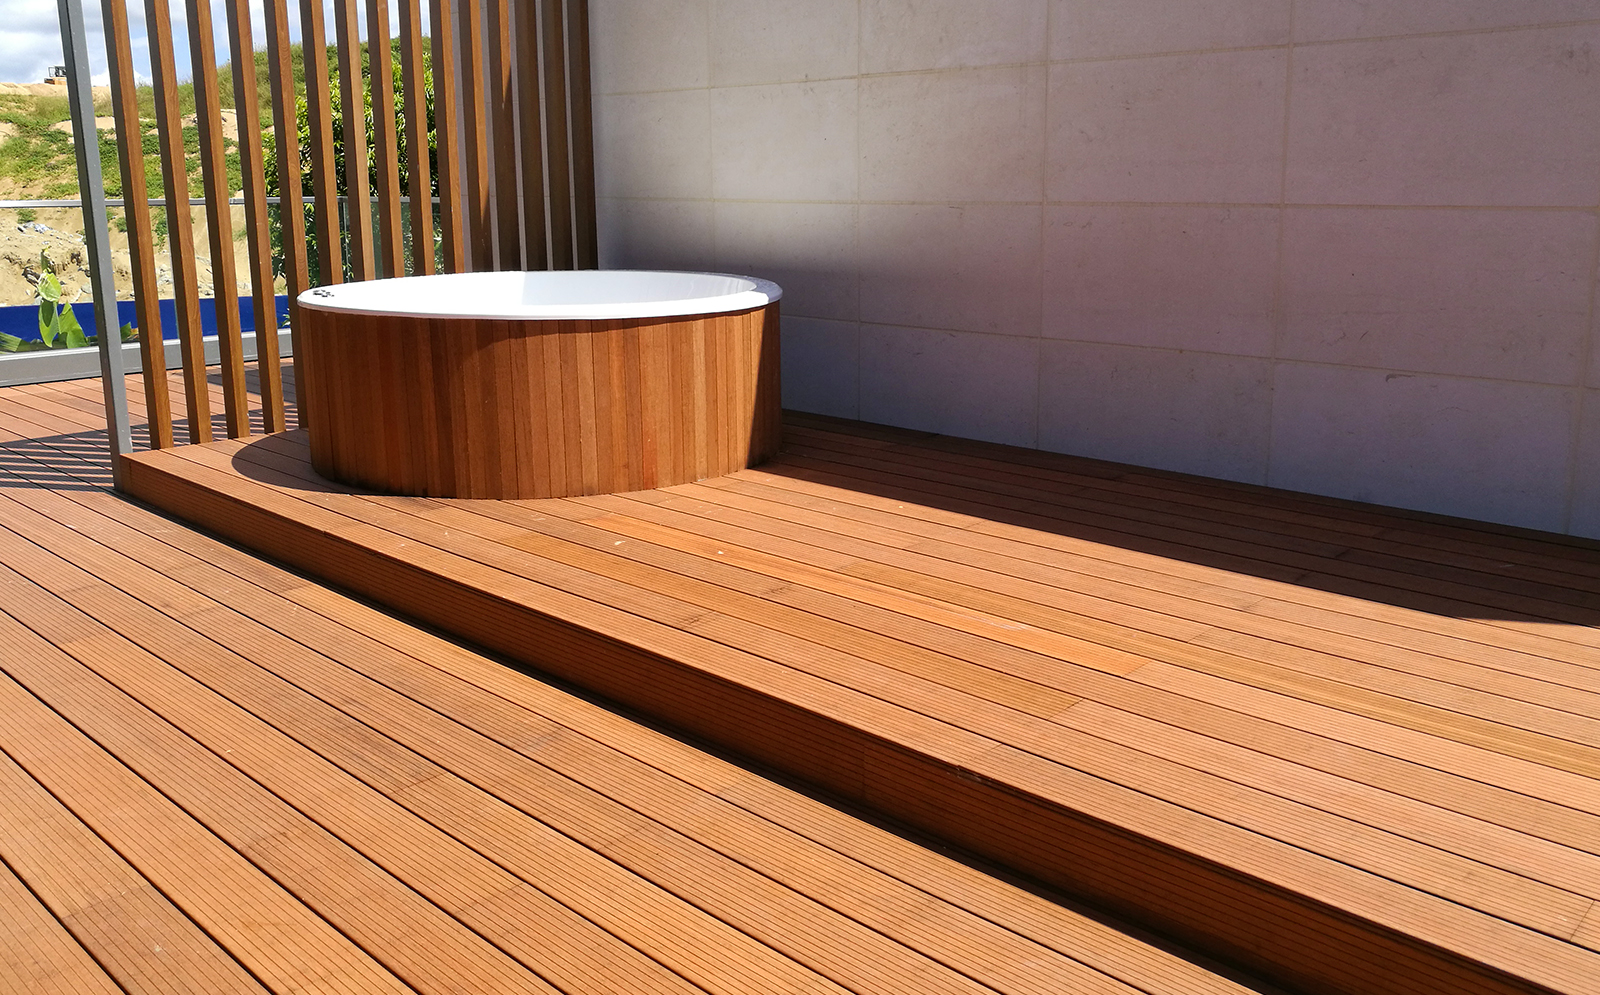 Dasso CTECH sustainable bamboo decking installed around a hot tub